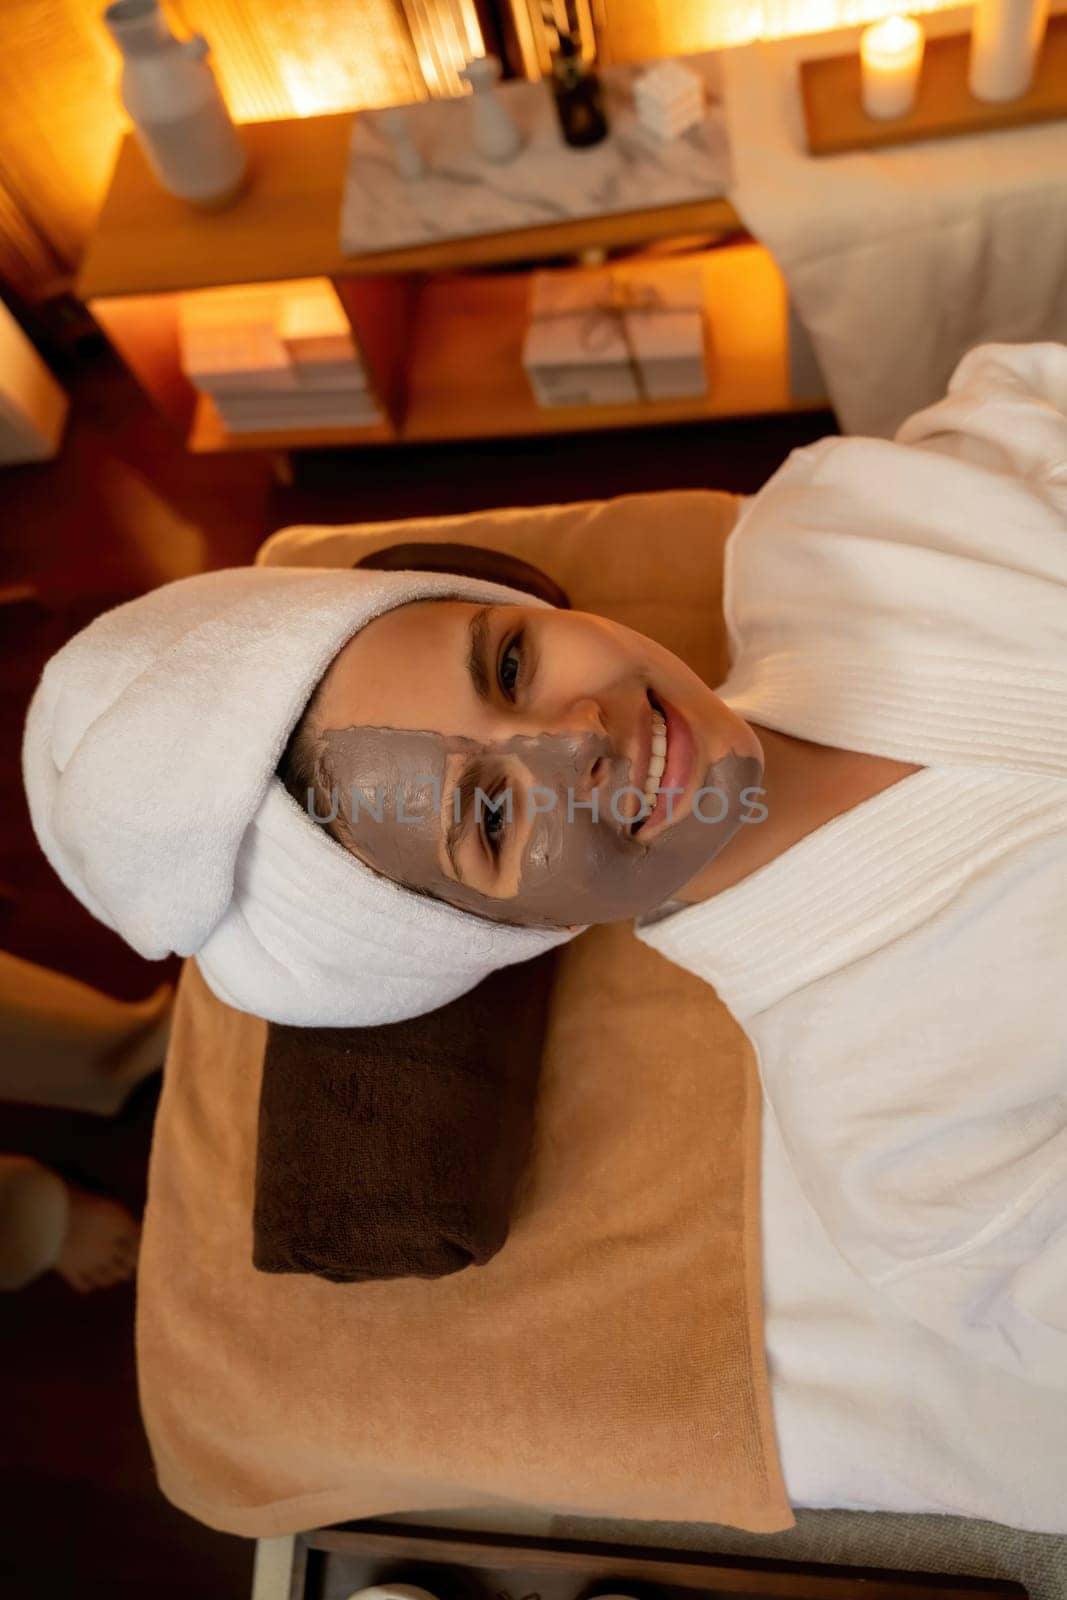 Woman indulges in rejuvenating with luxurious face cream spa massage. Quiescent by biancoblue